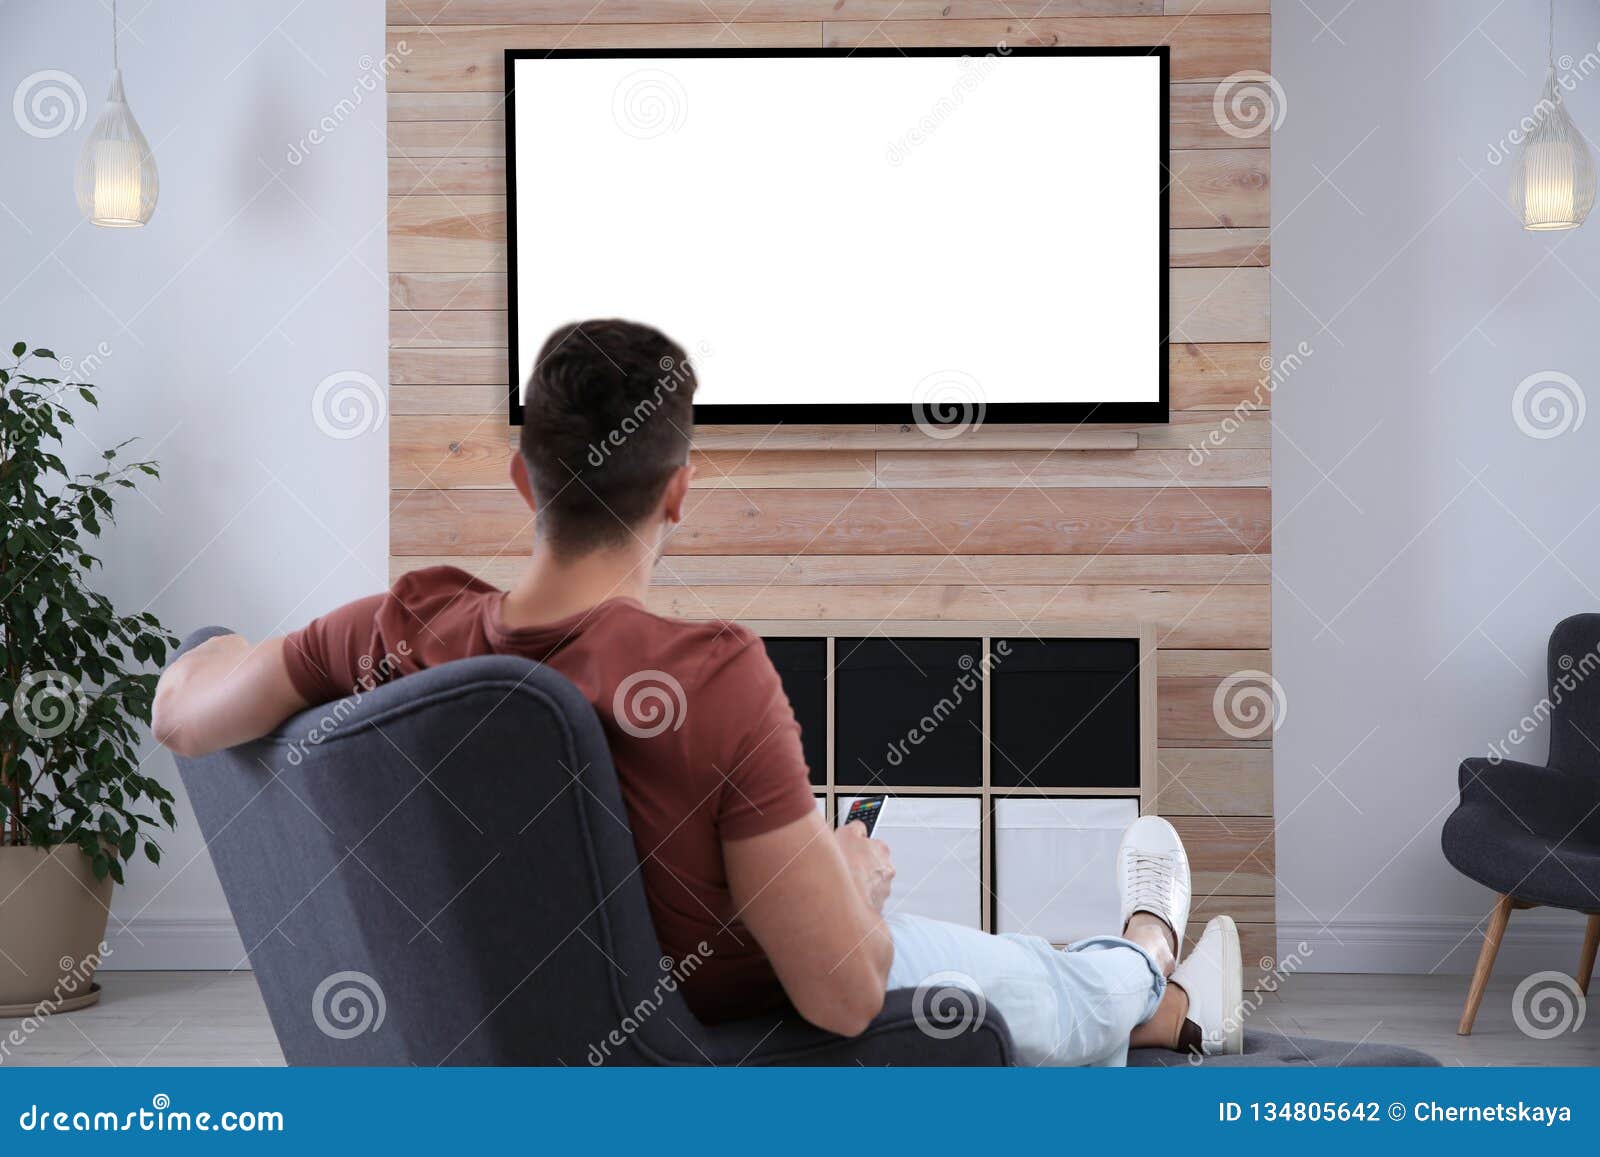 Young Man Watching Tv In Armchair Stock Photo Image Of